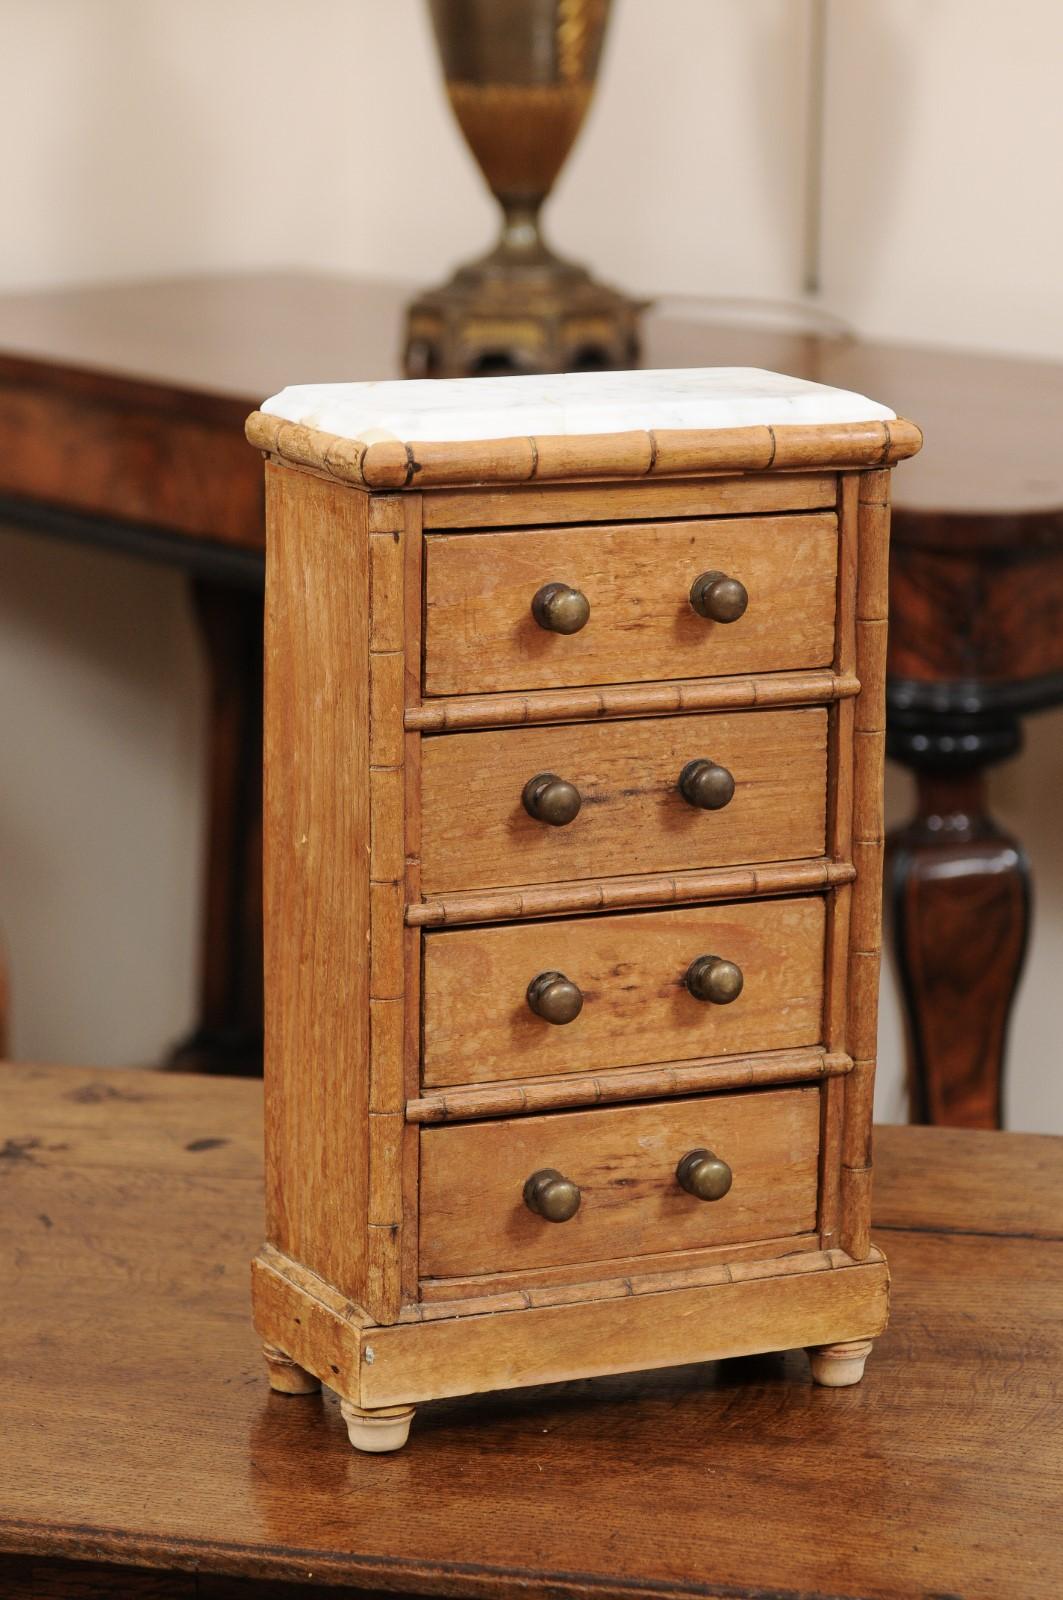 This petite chest would work well as a jewelry box or or for cufflinks or other small accessories storage. Featuring pine carved in a bamboo style, brass knobs and a marble top, this piece originates from England, ca. 1900. Truly charming.